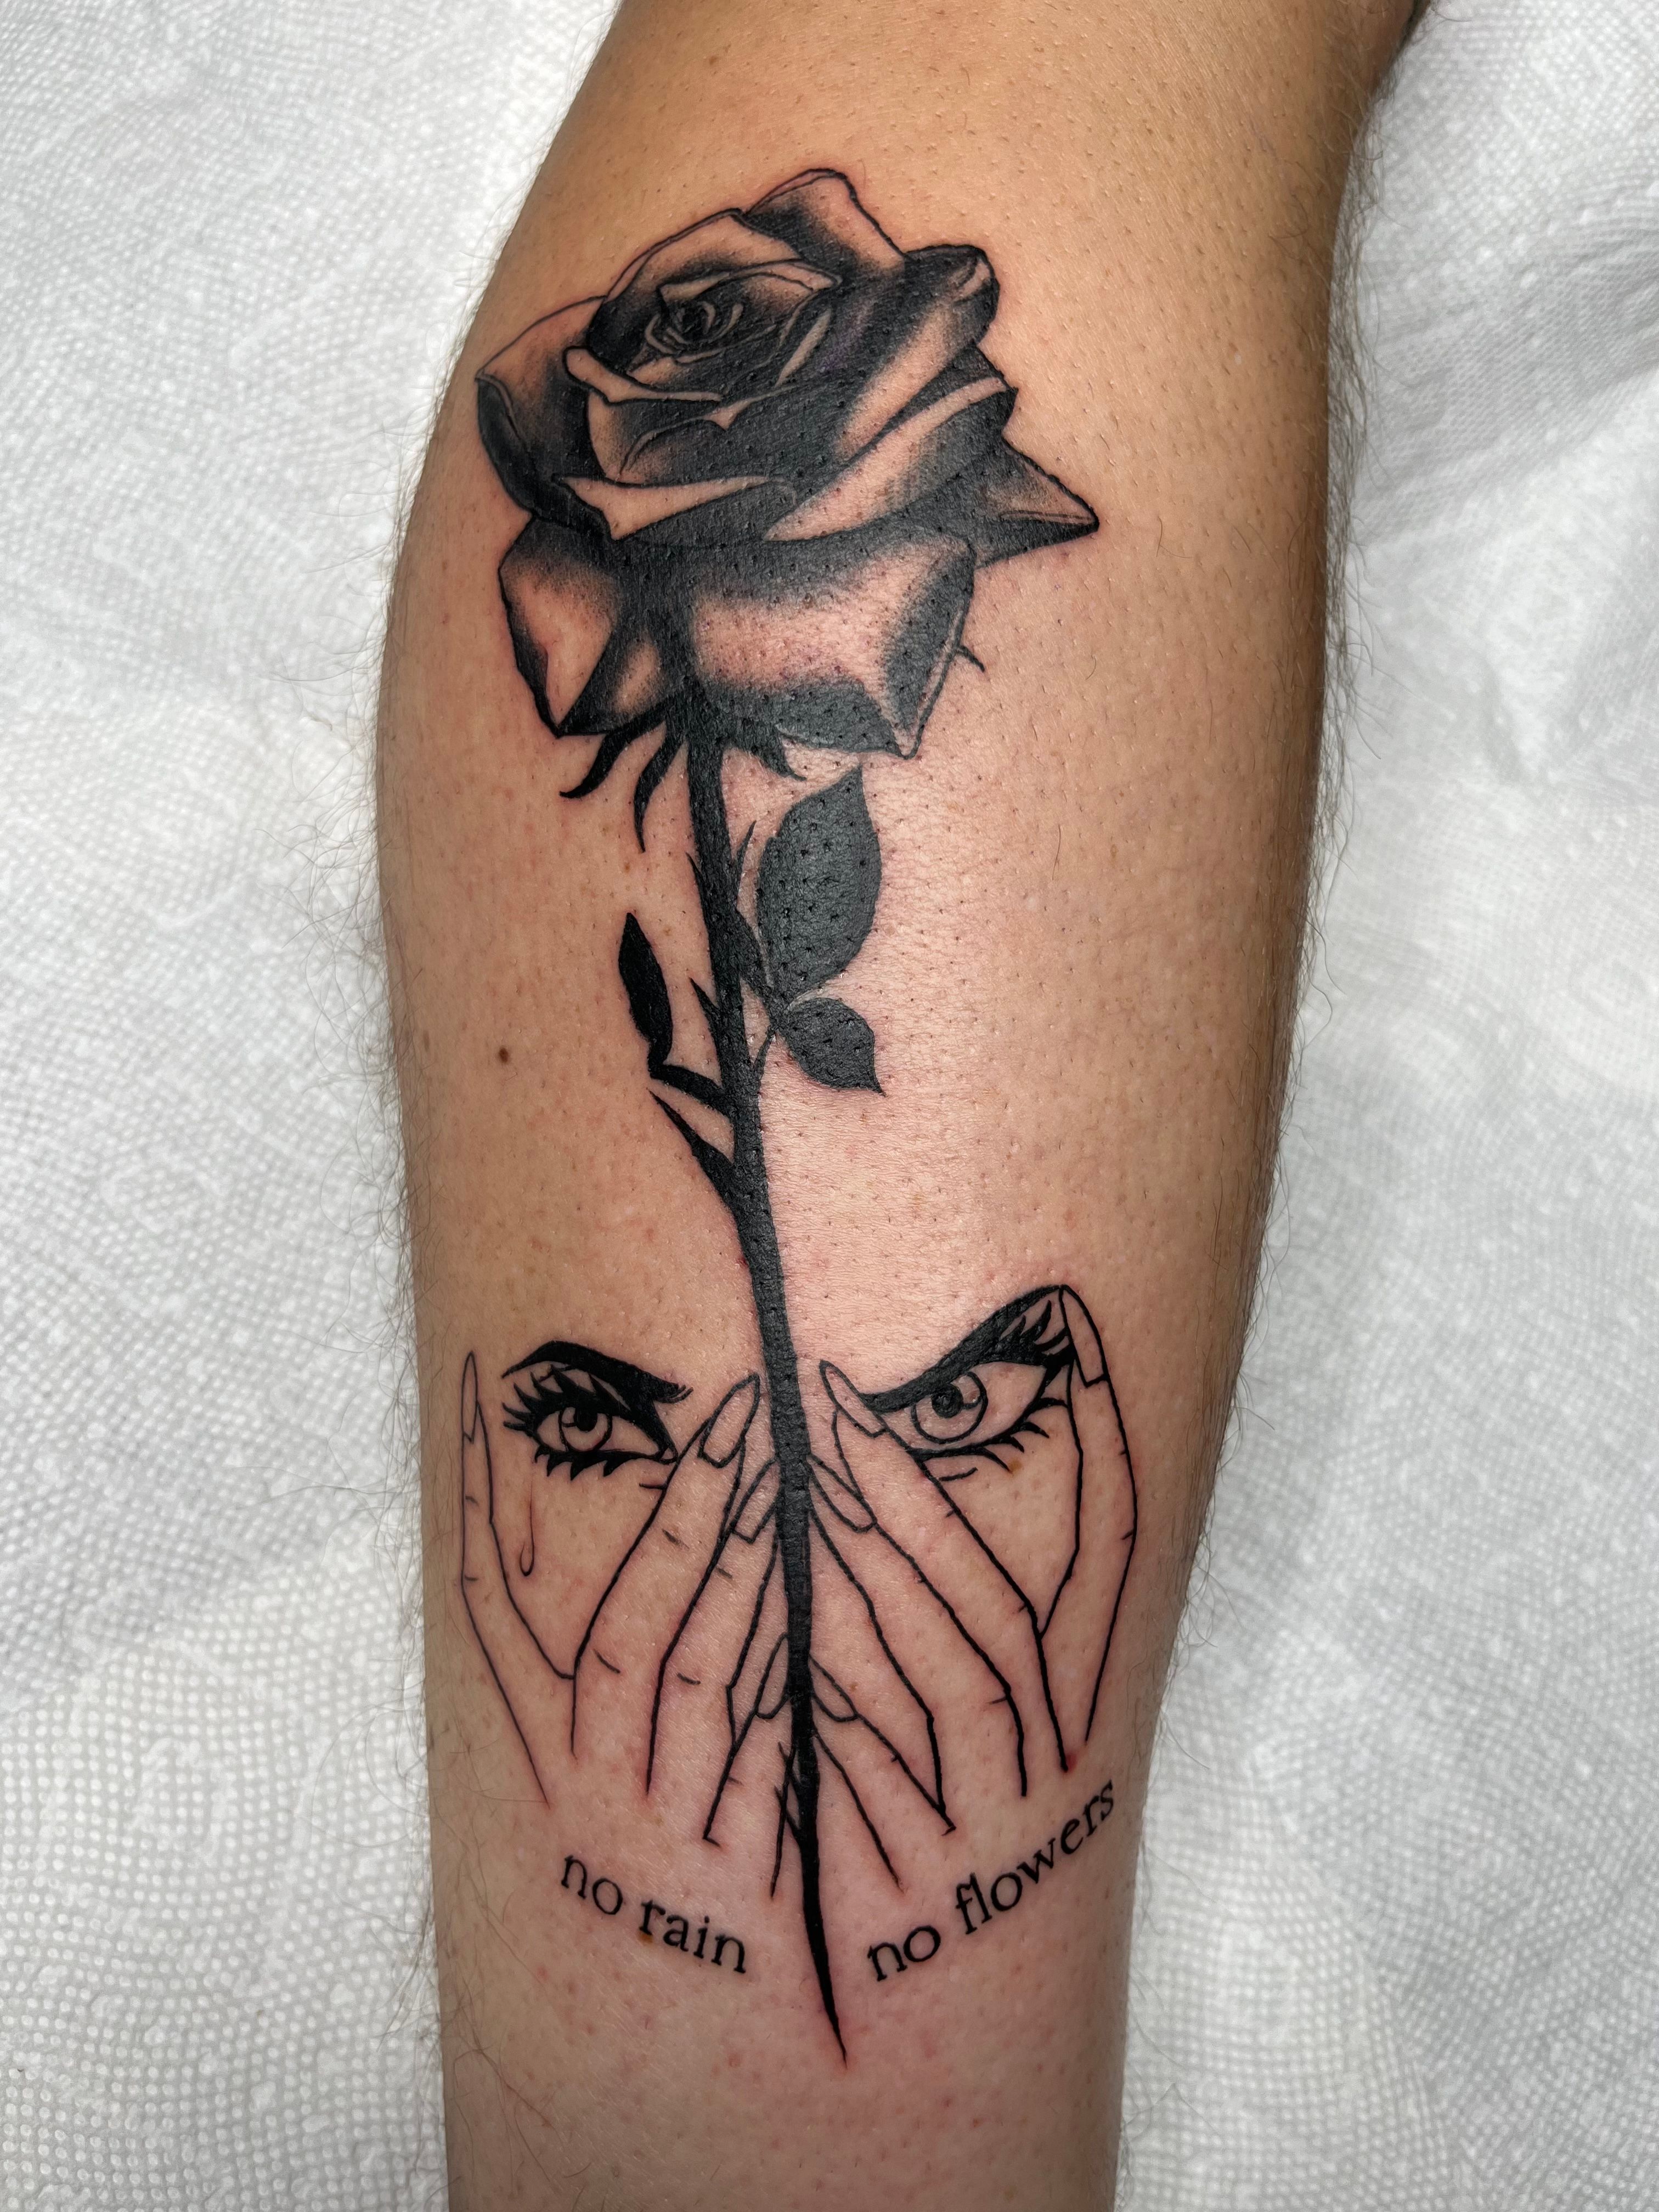 101 Best No Rain No Flowers Tattoo Ideas That Will Blow Your Mind  Outsons